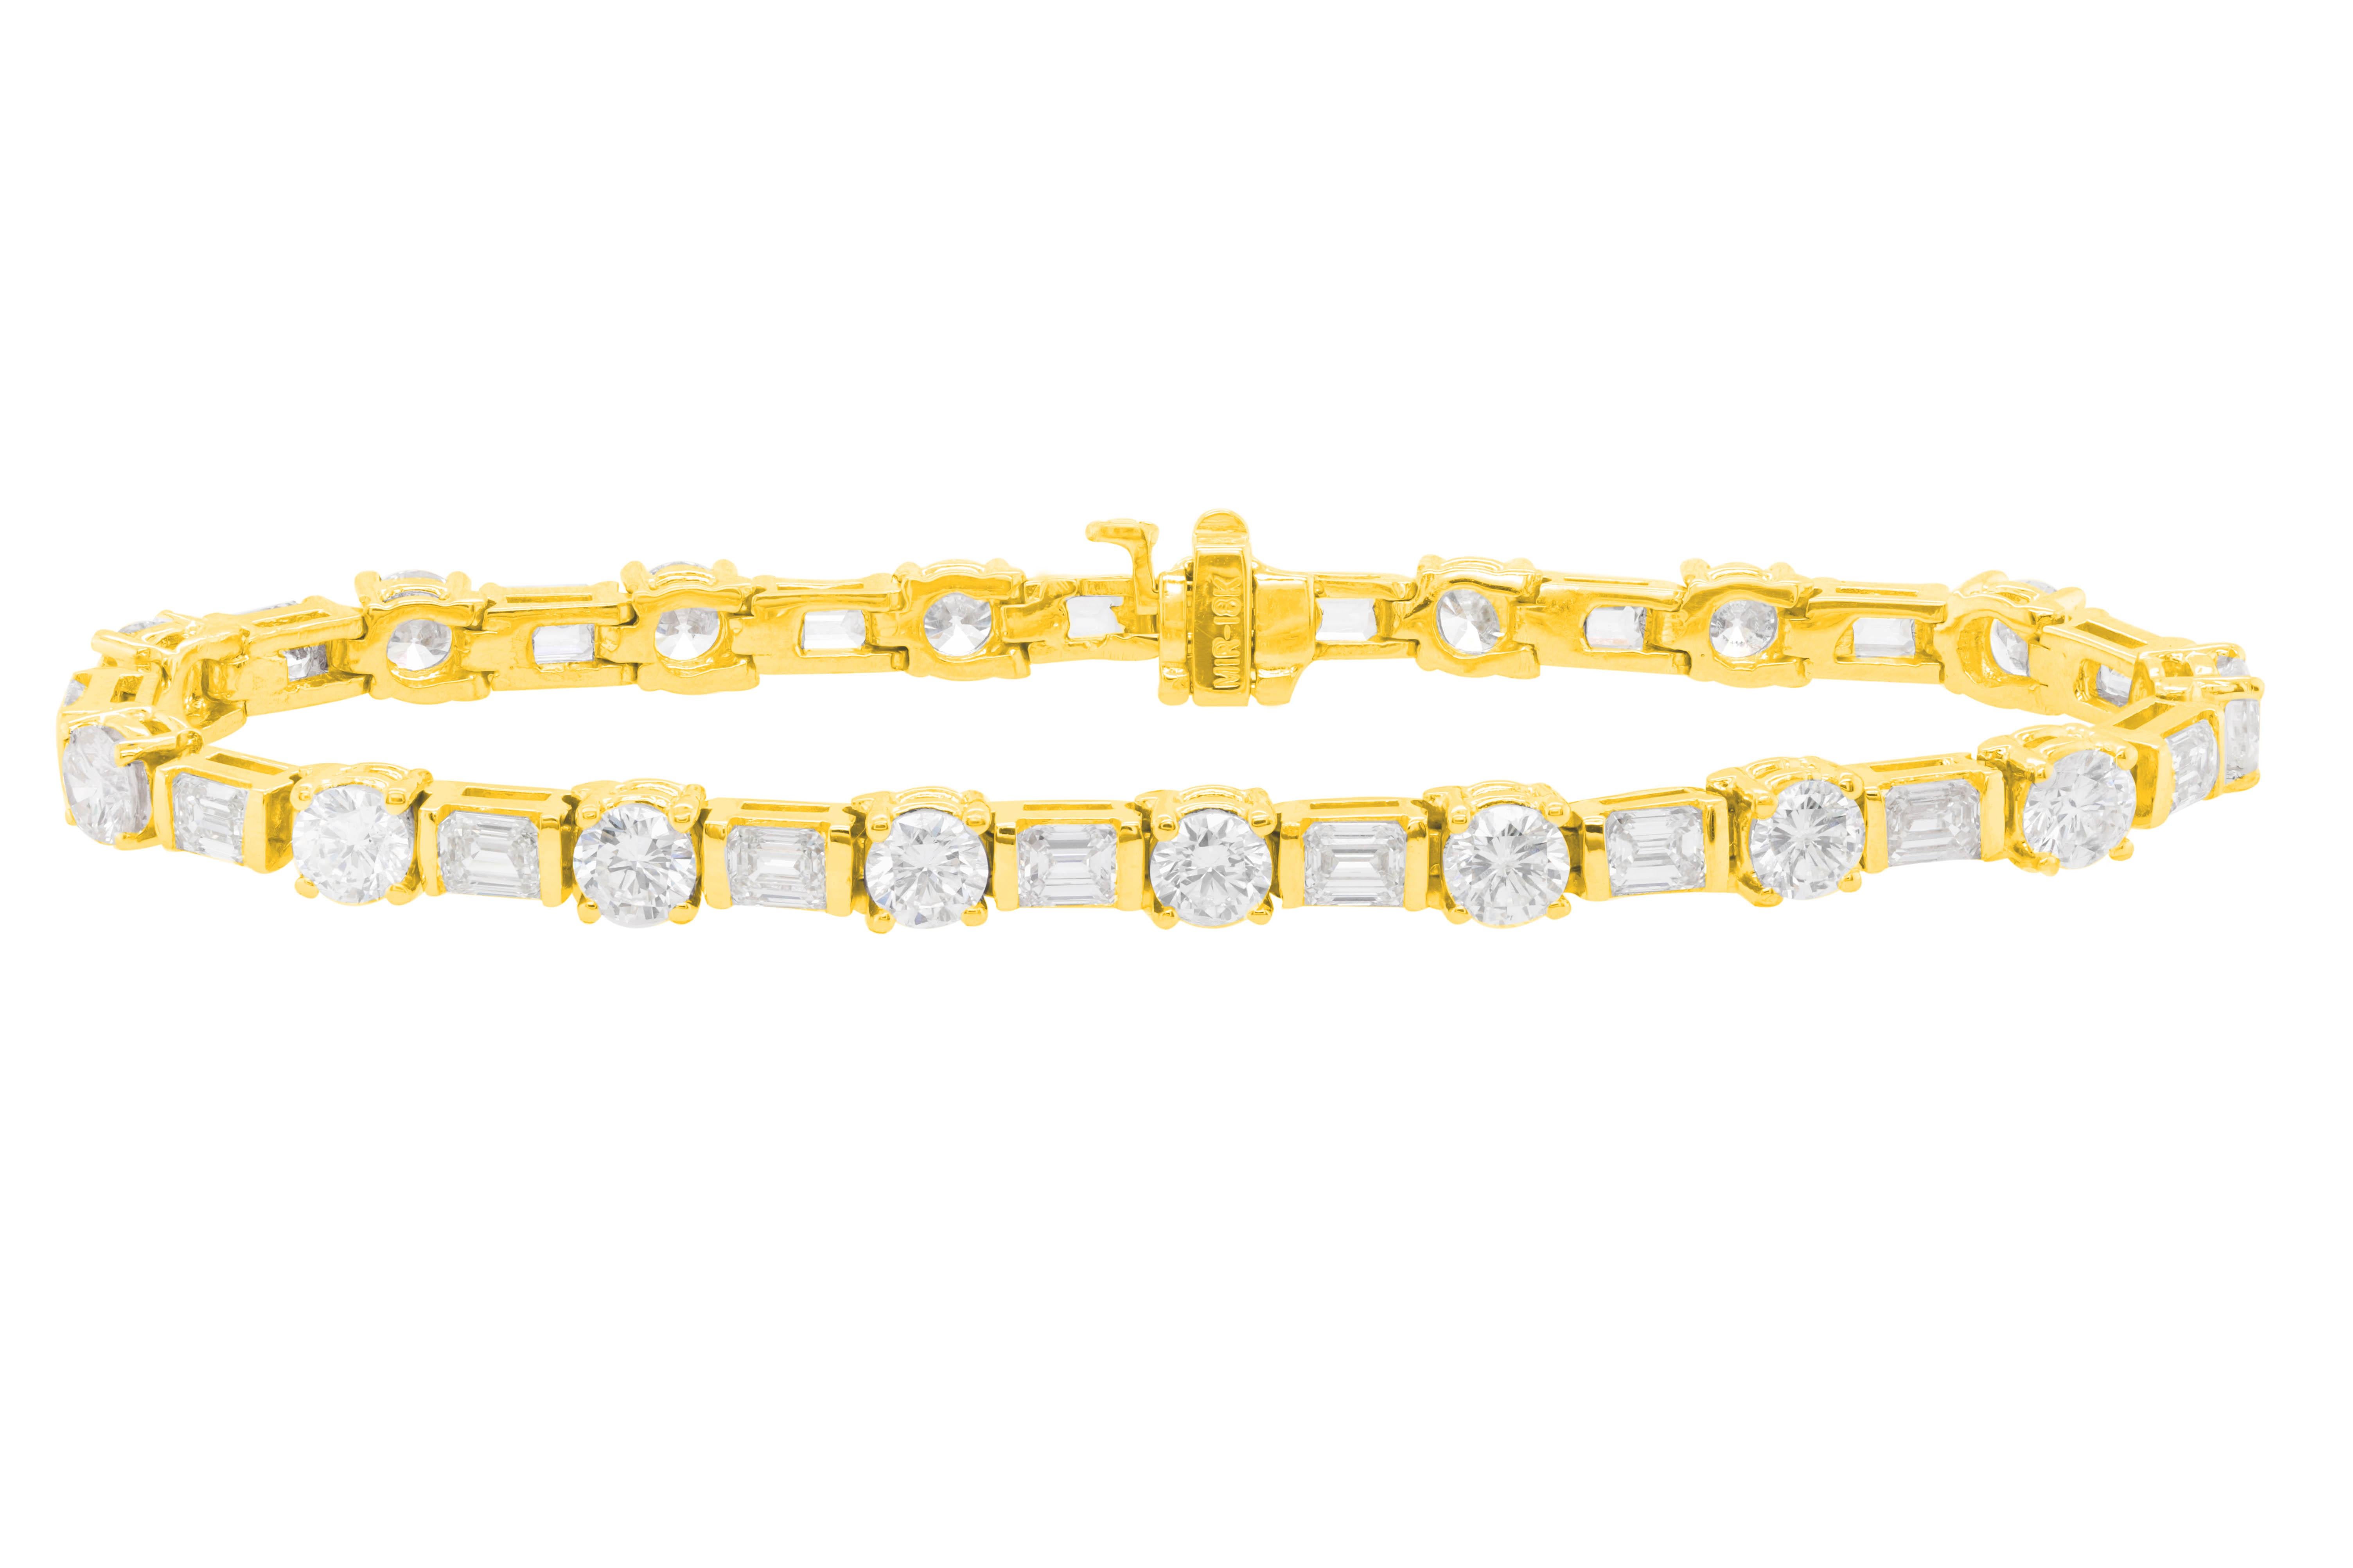 18 kt yellow gold diamond tennis bracelet adorned with 10.00 cts tw of alternating horizontally set baguette cut and round diamonds (34 stones)
Diana M. is a leading supplier of top-quality fine jewelry for over 35 years.
Diana M is one-stop shop